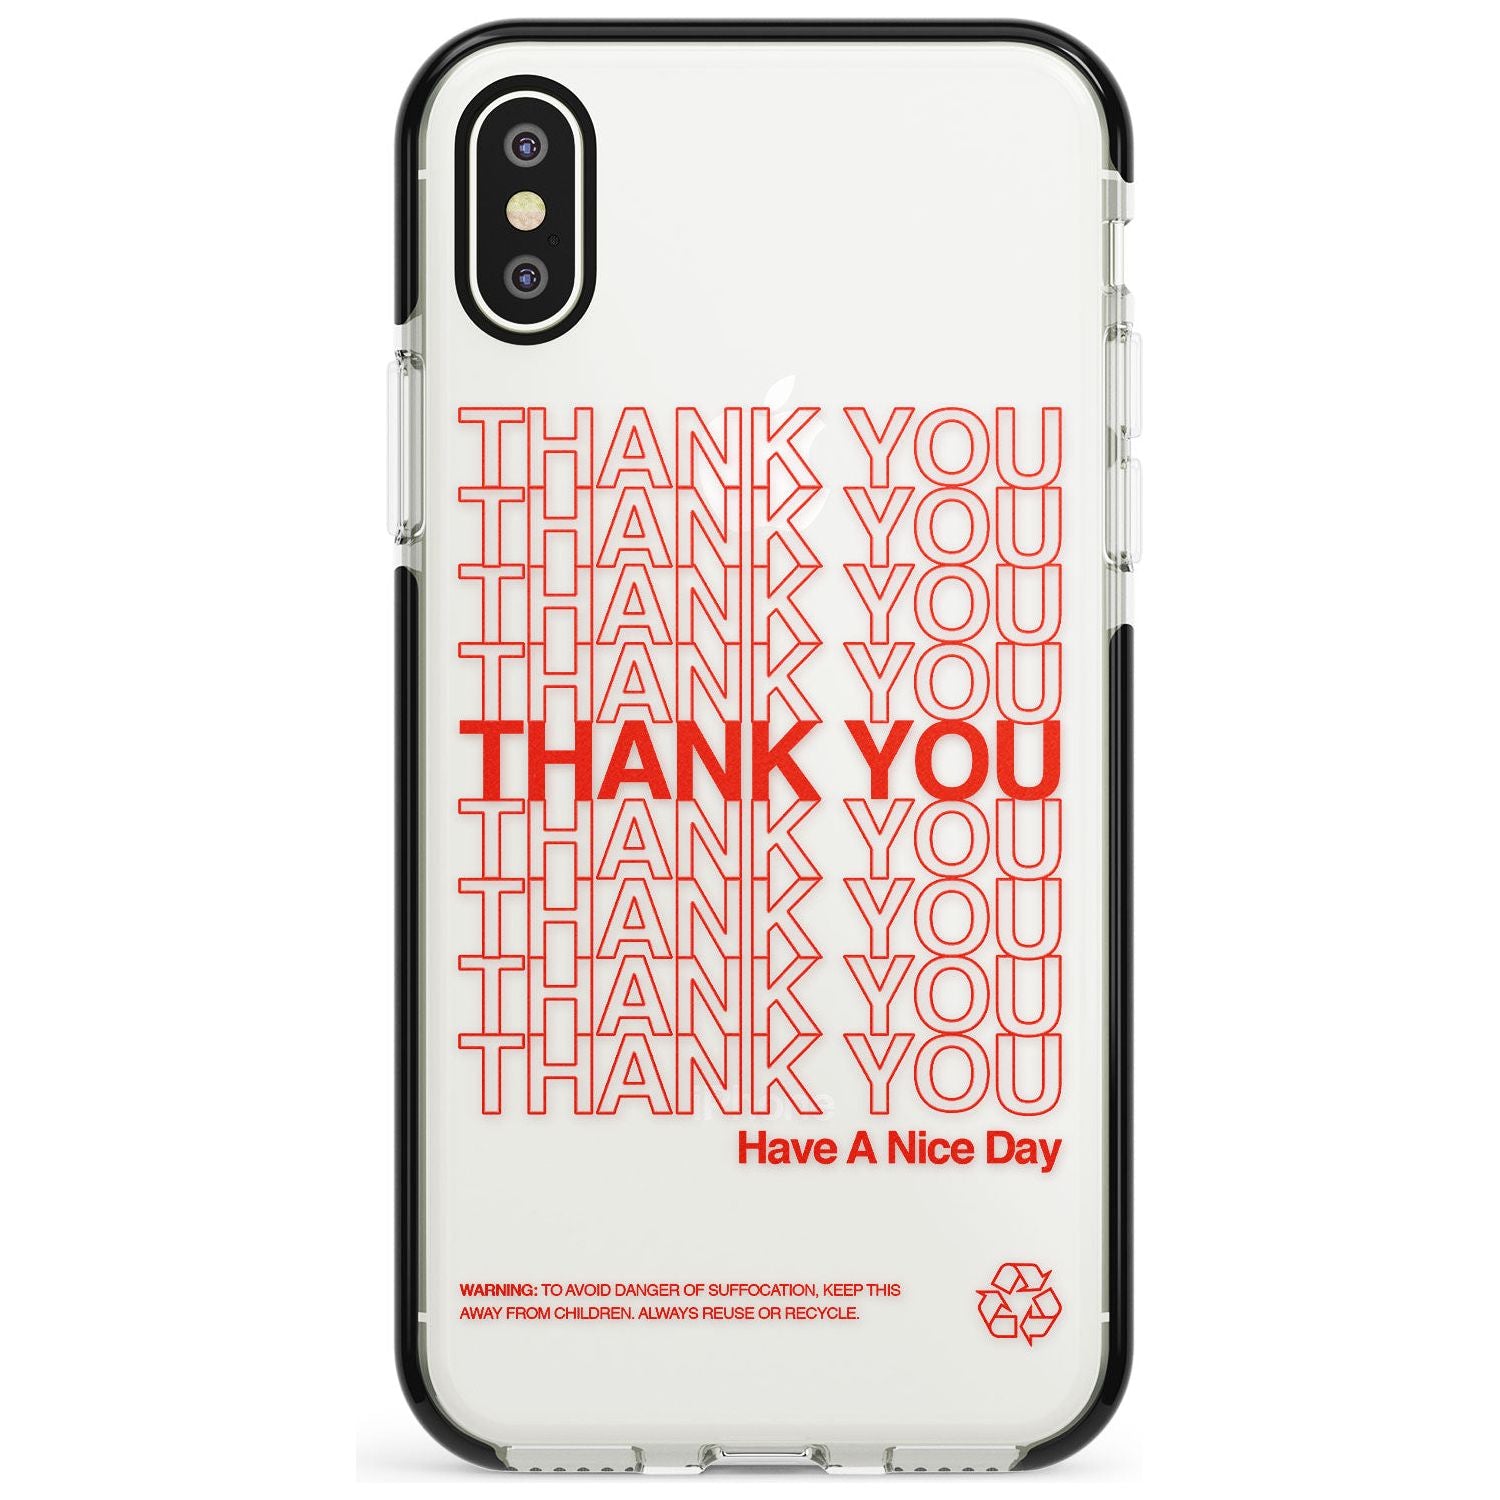 Classic Thank You Bag Design: Solid White + Red Black Impact Phone Case for iPhone X XS Max XR